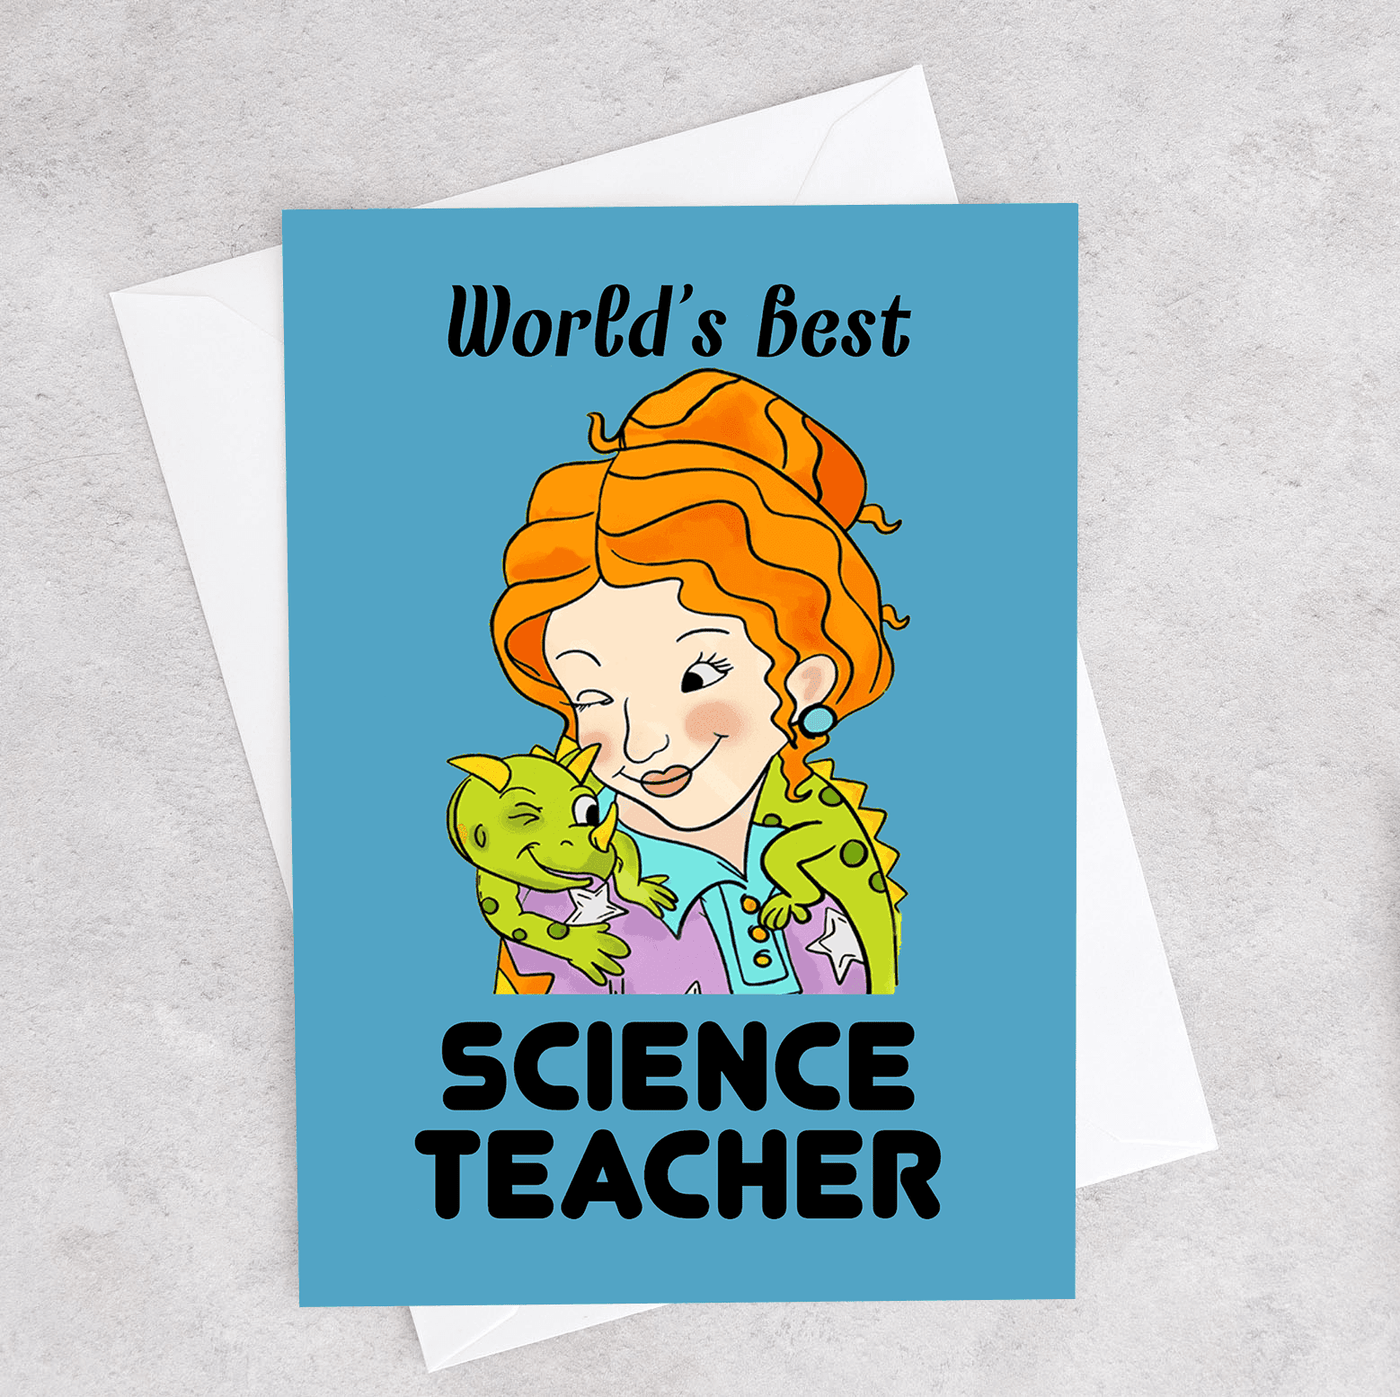 This greeting card shows Miss Frizzle and Liz the lizard from the Magic School Bus and says "World's Best Science Teacher"